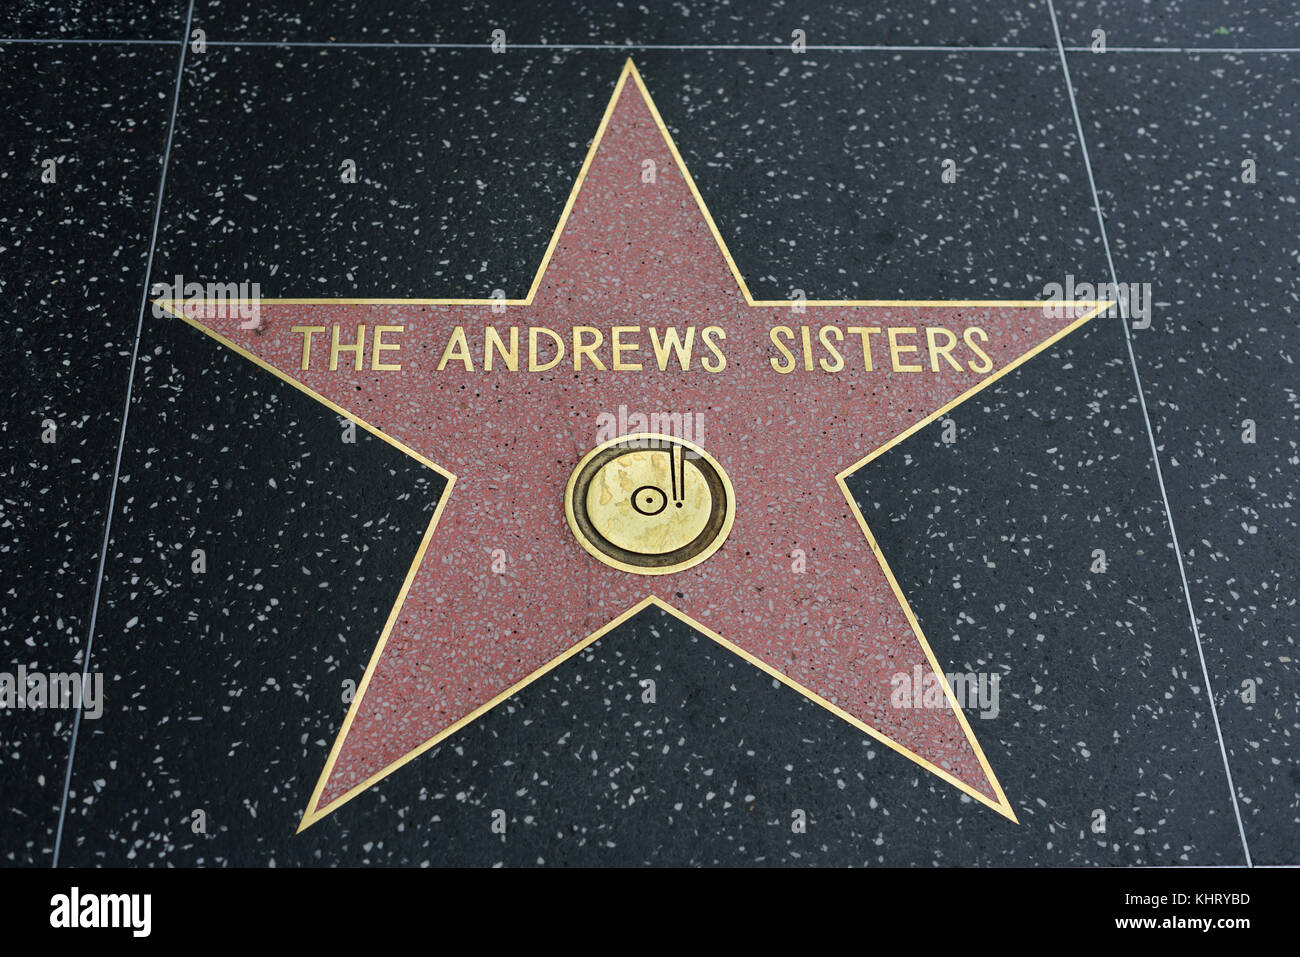 HOLLYWOOD, CA - DECEMBER 06: The Andrews Sister star on the Hollywood Walk of Fame in Hollywood, California on Dec. 6, 2016. Stock Photo